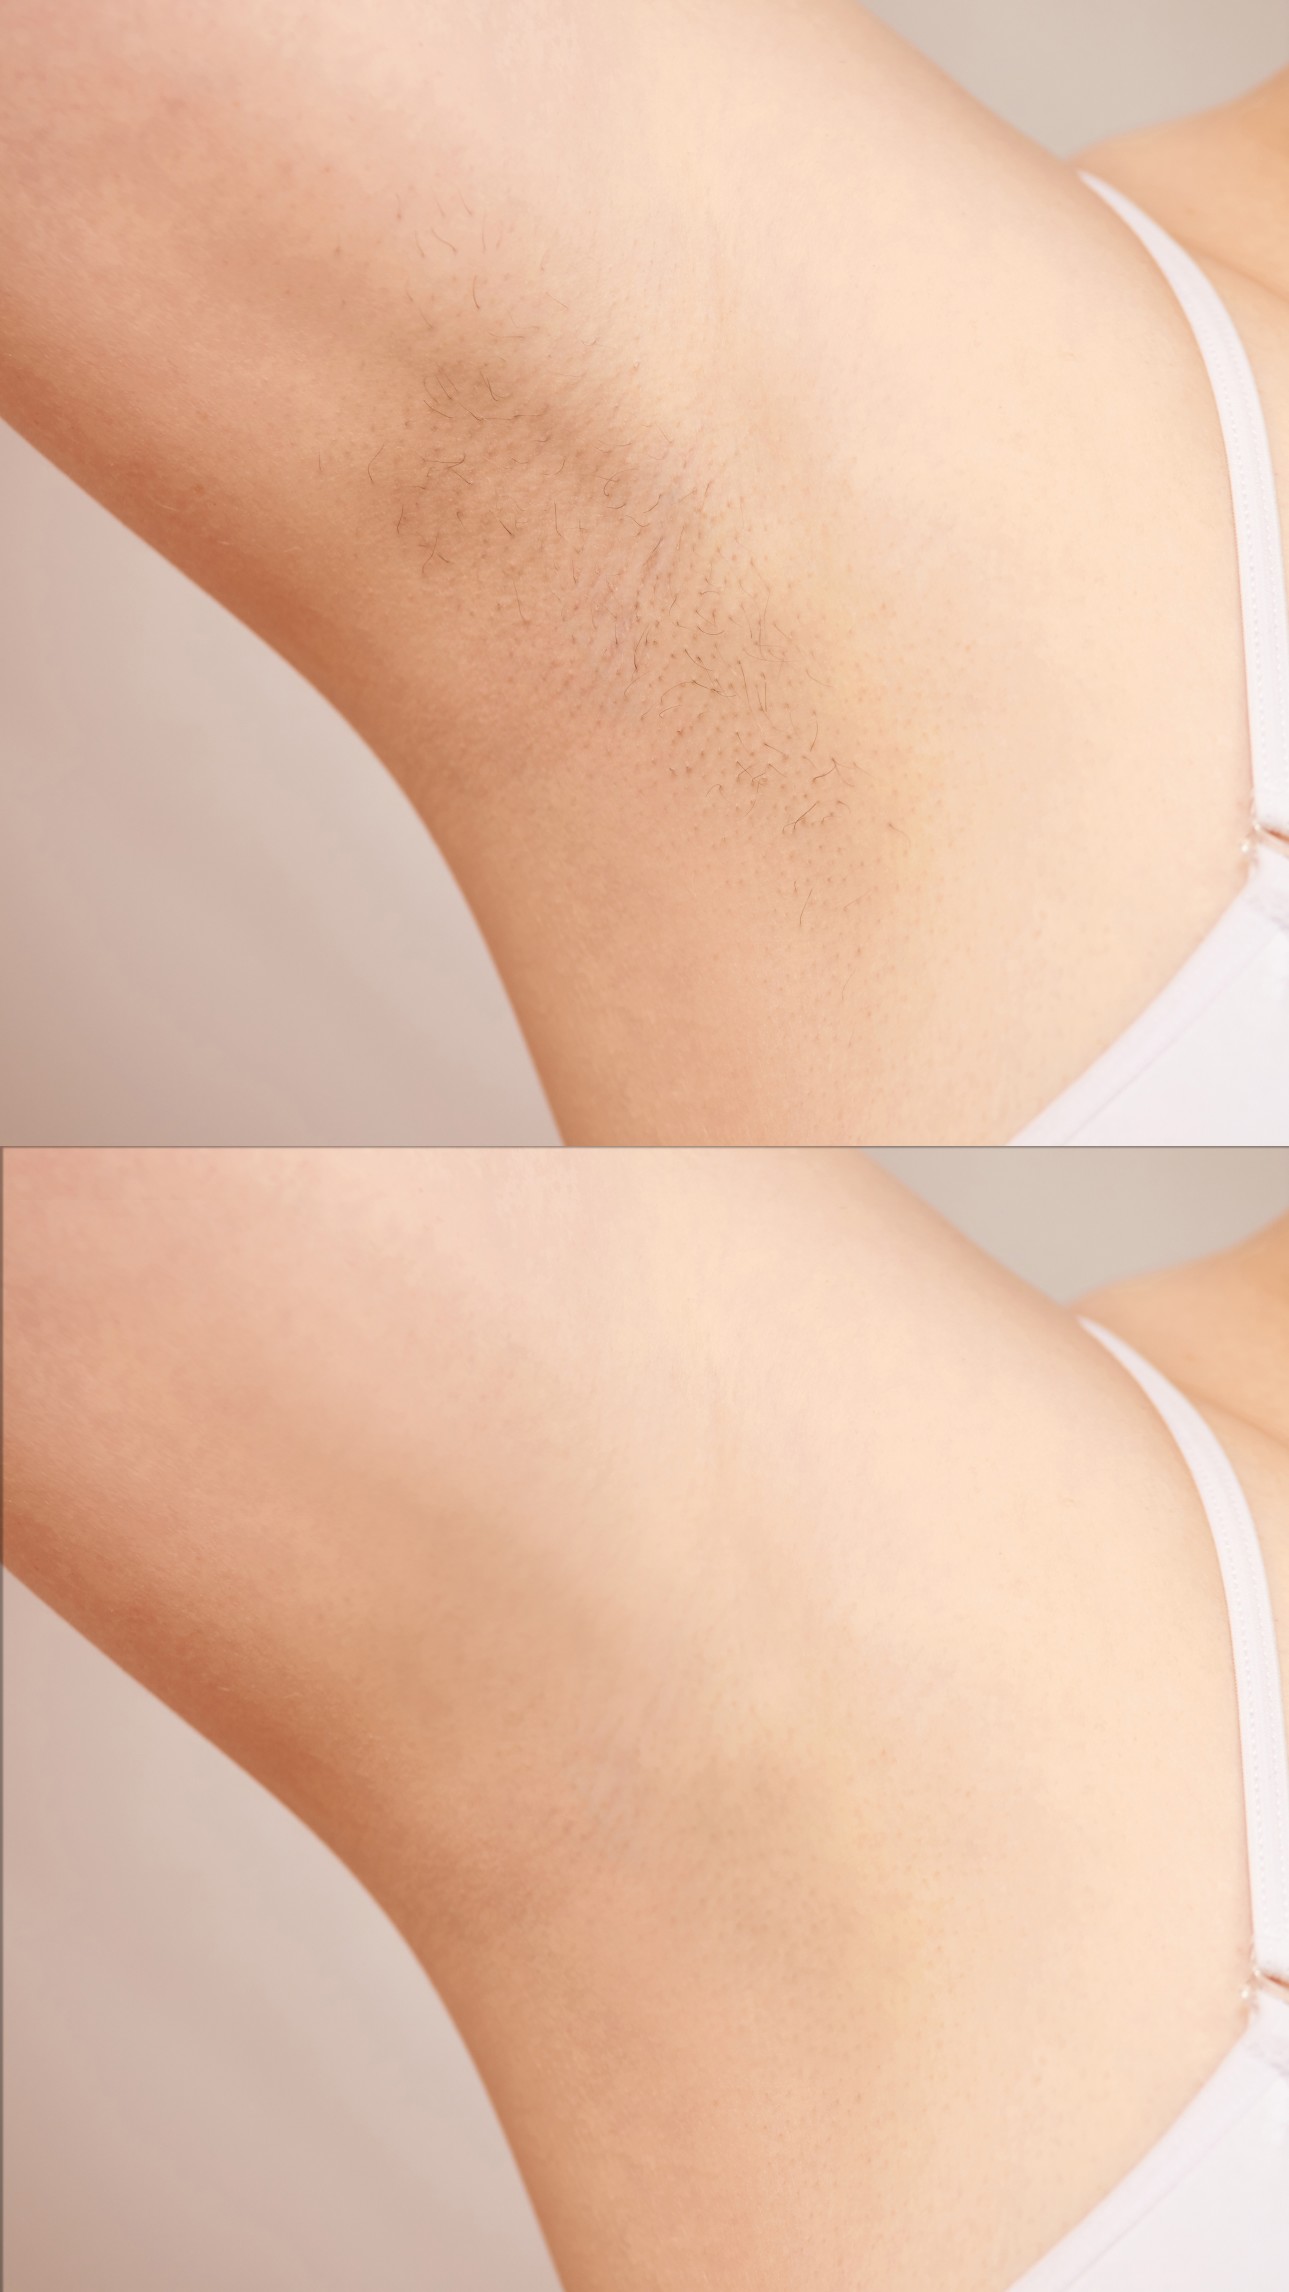 Is Laser Hair Removal Safe?